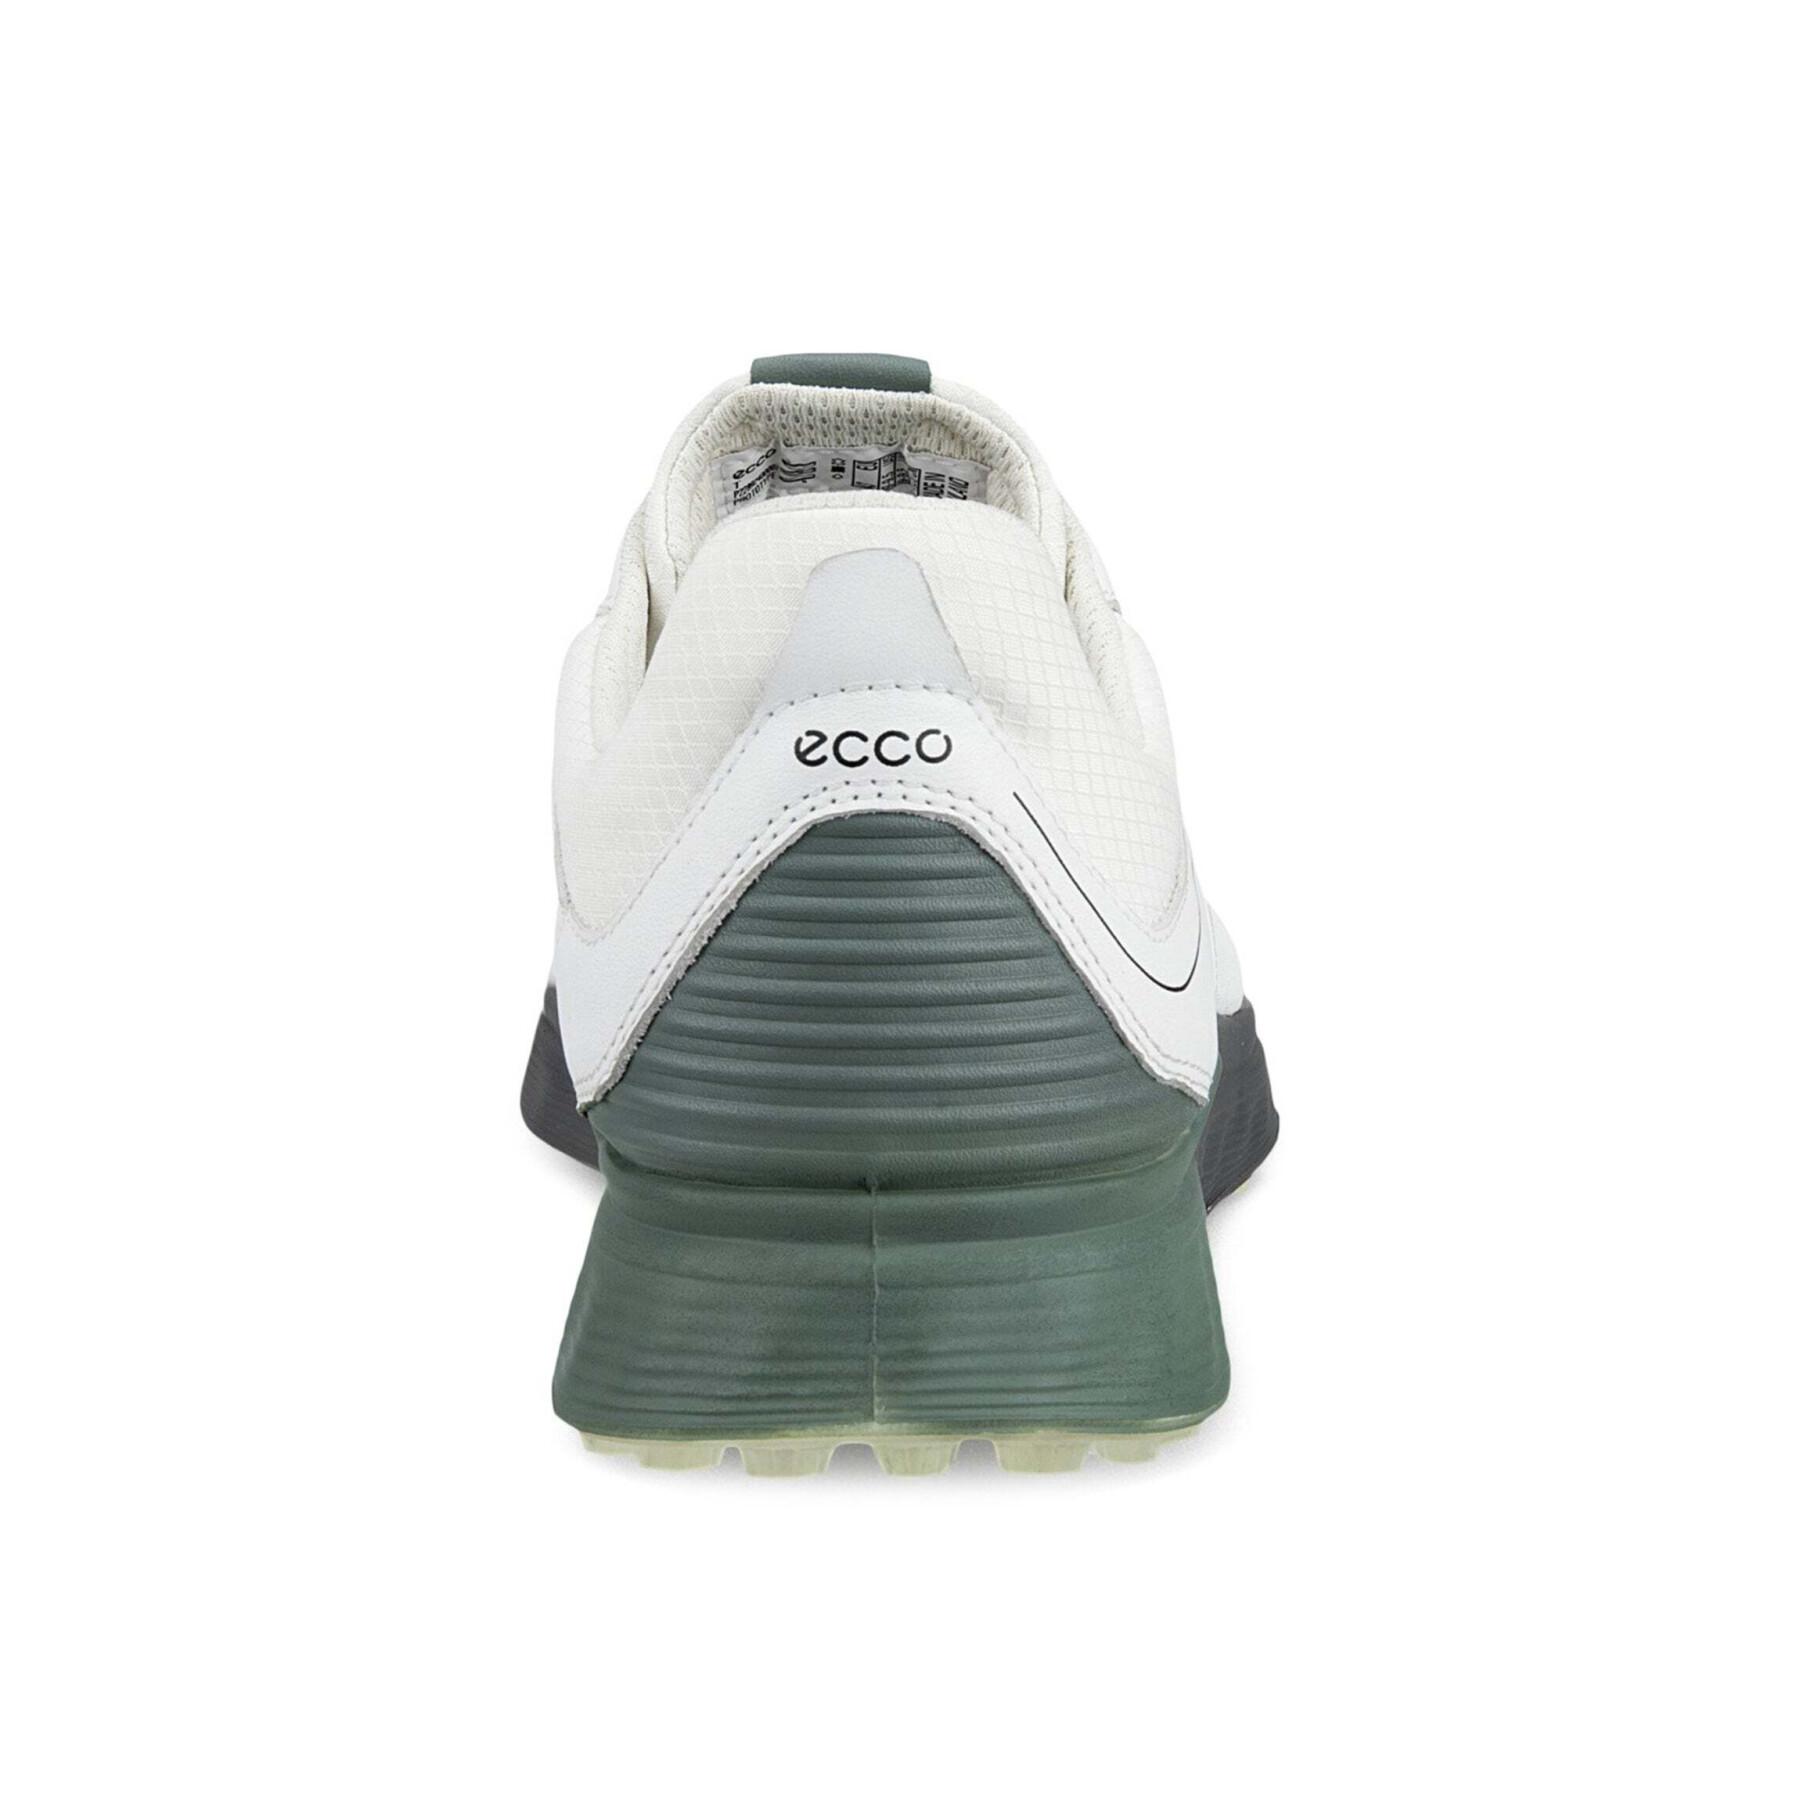 Spikeless golf shoes Ecco S-Three